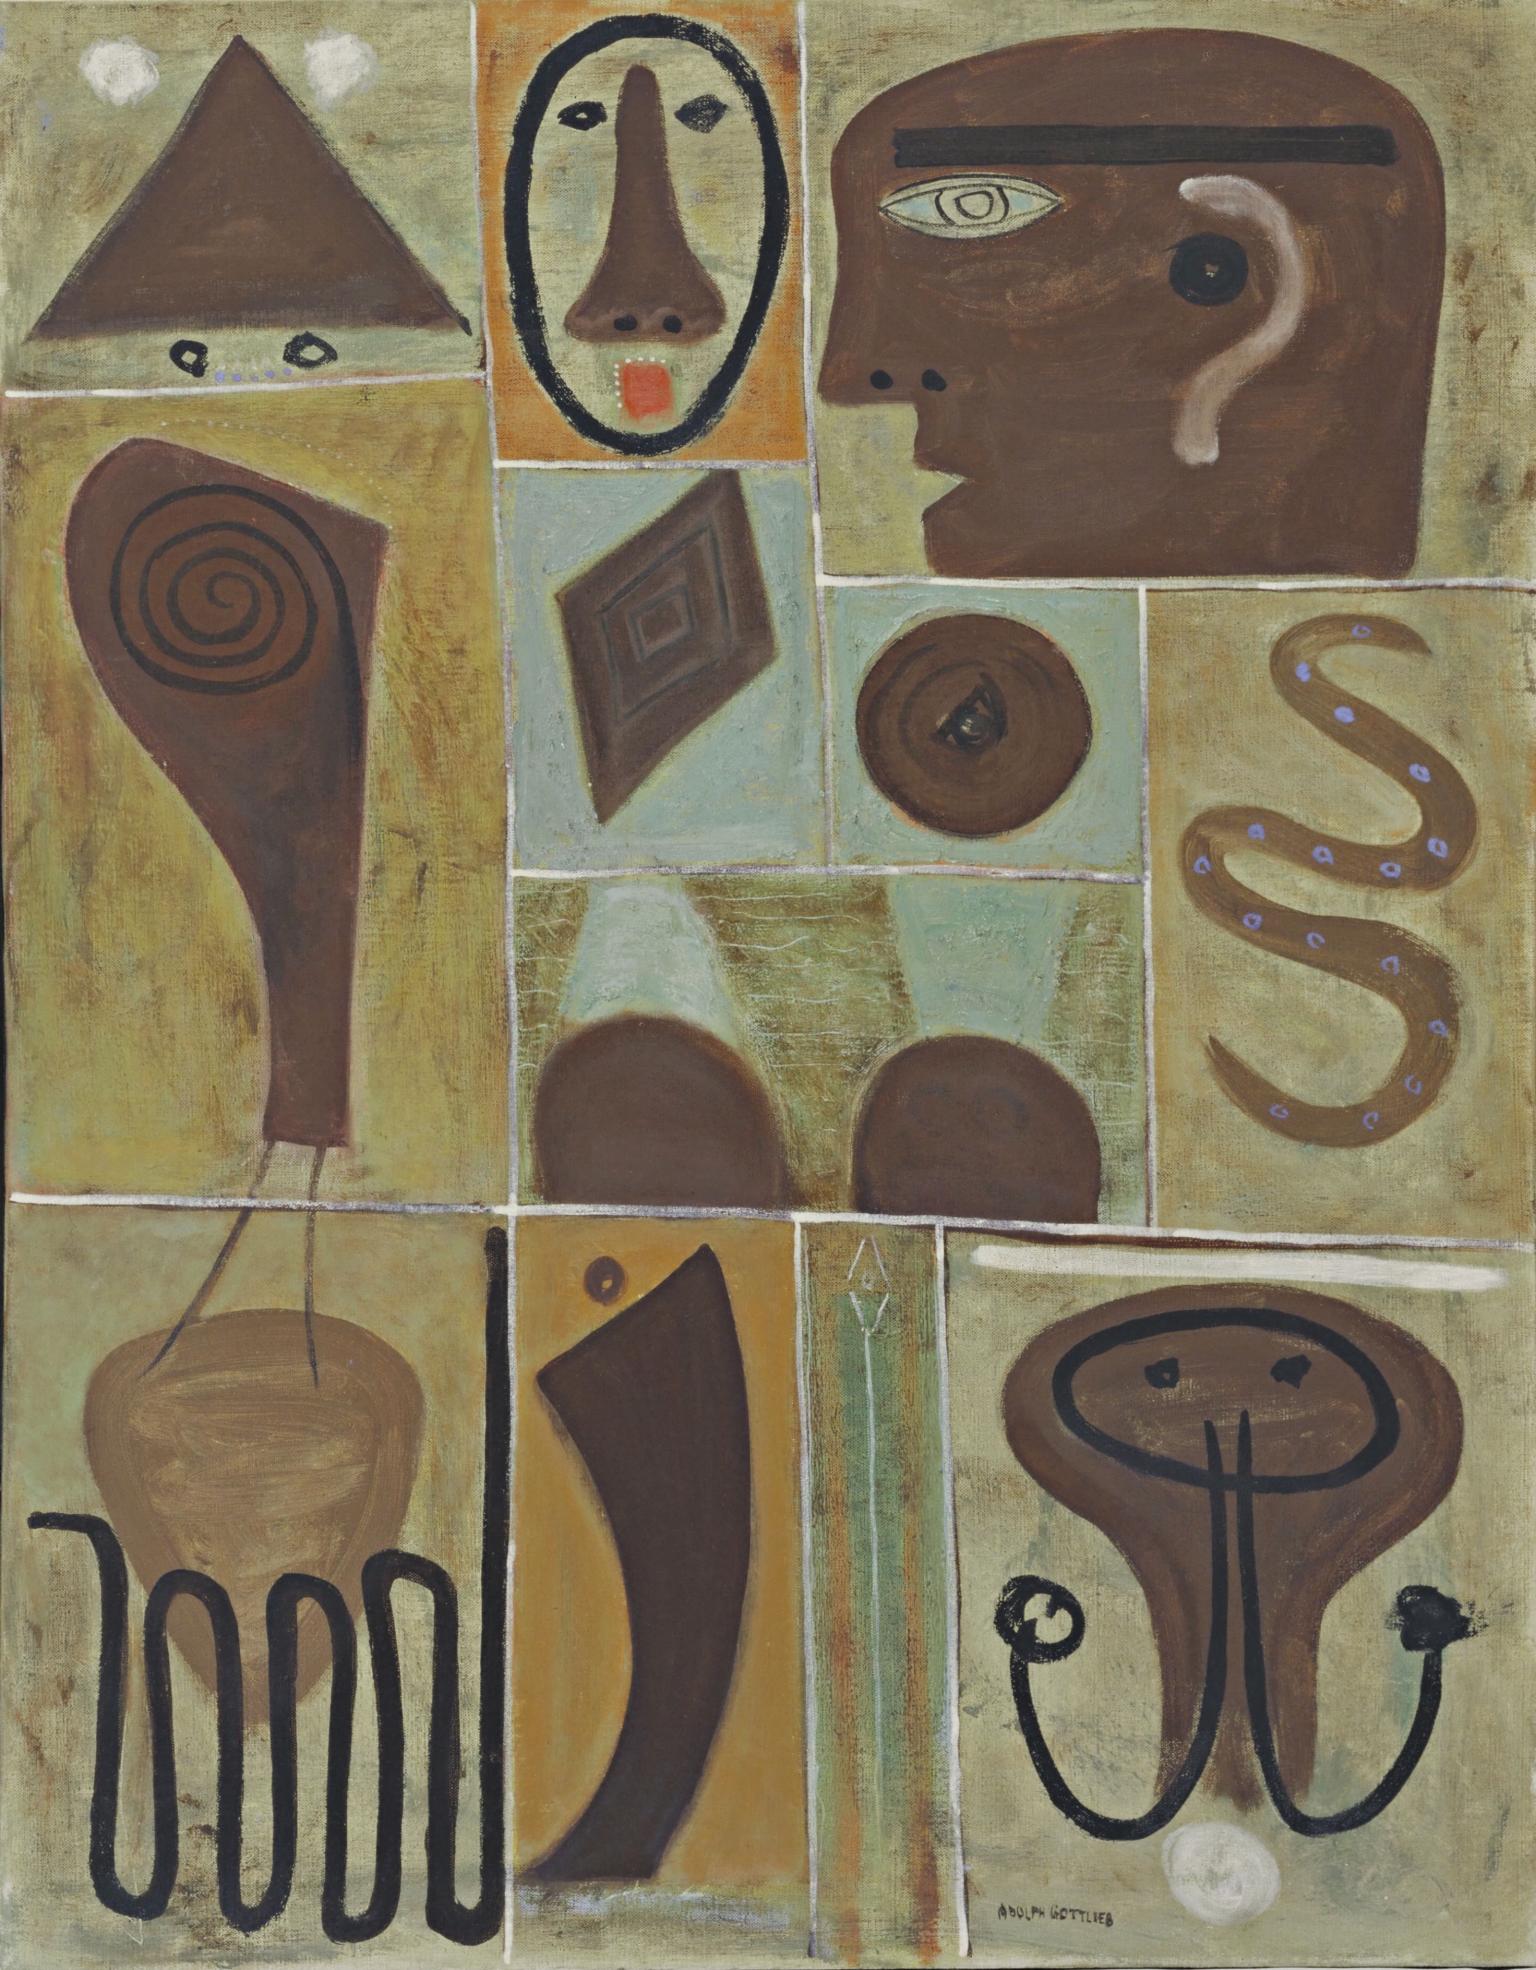 Pictographic paintings depicting geometric shapes and abstract faces in grid.